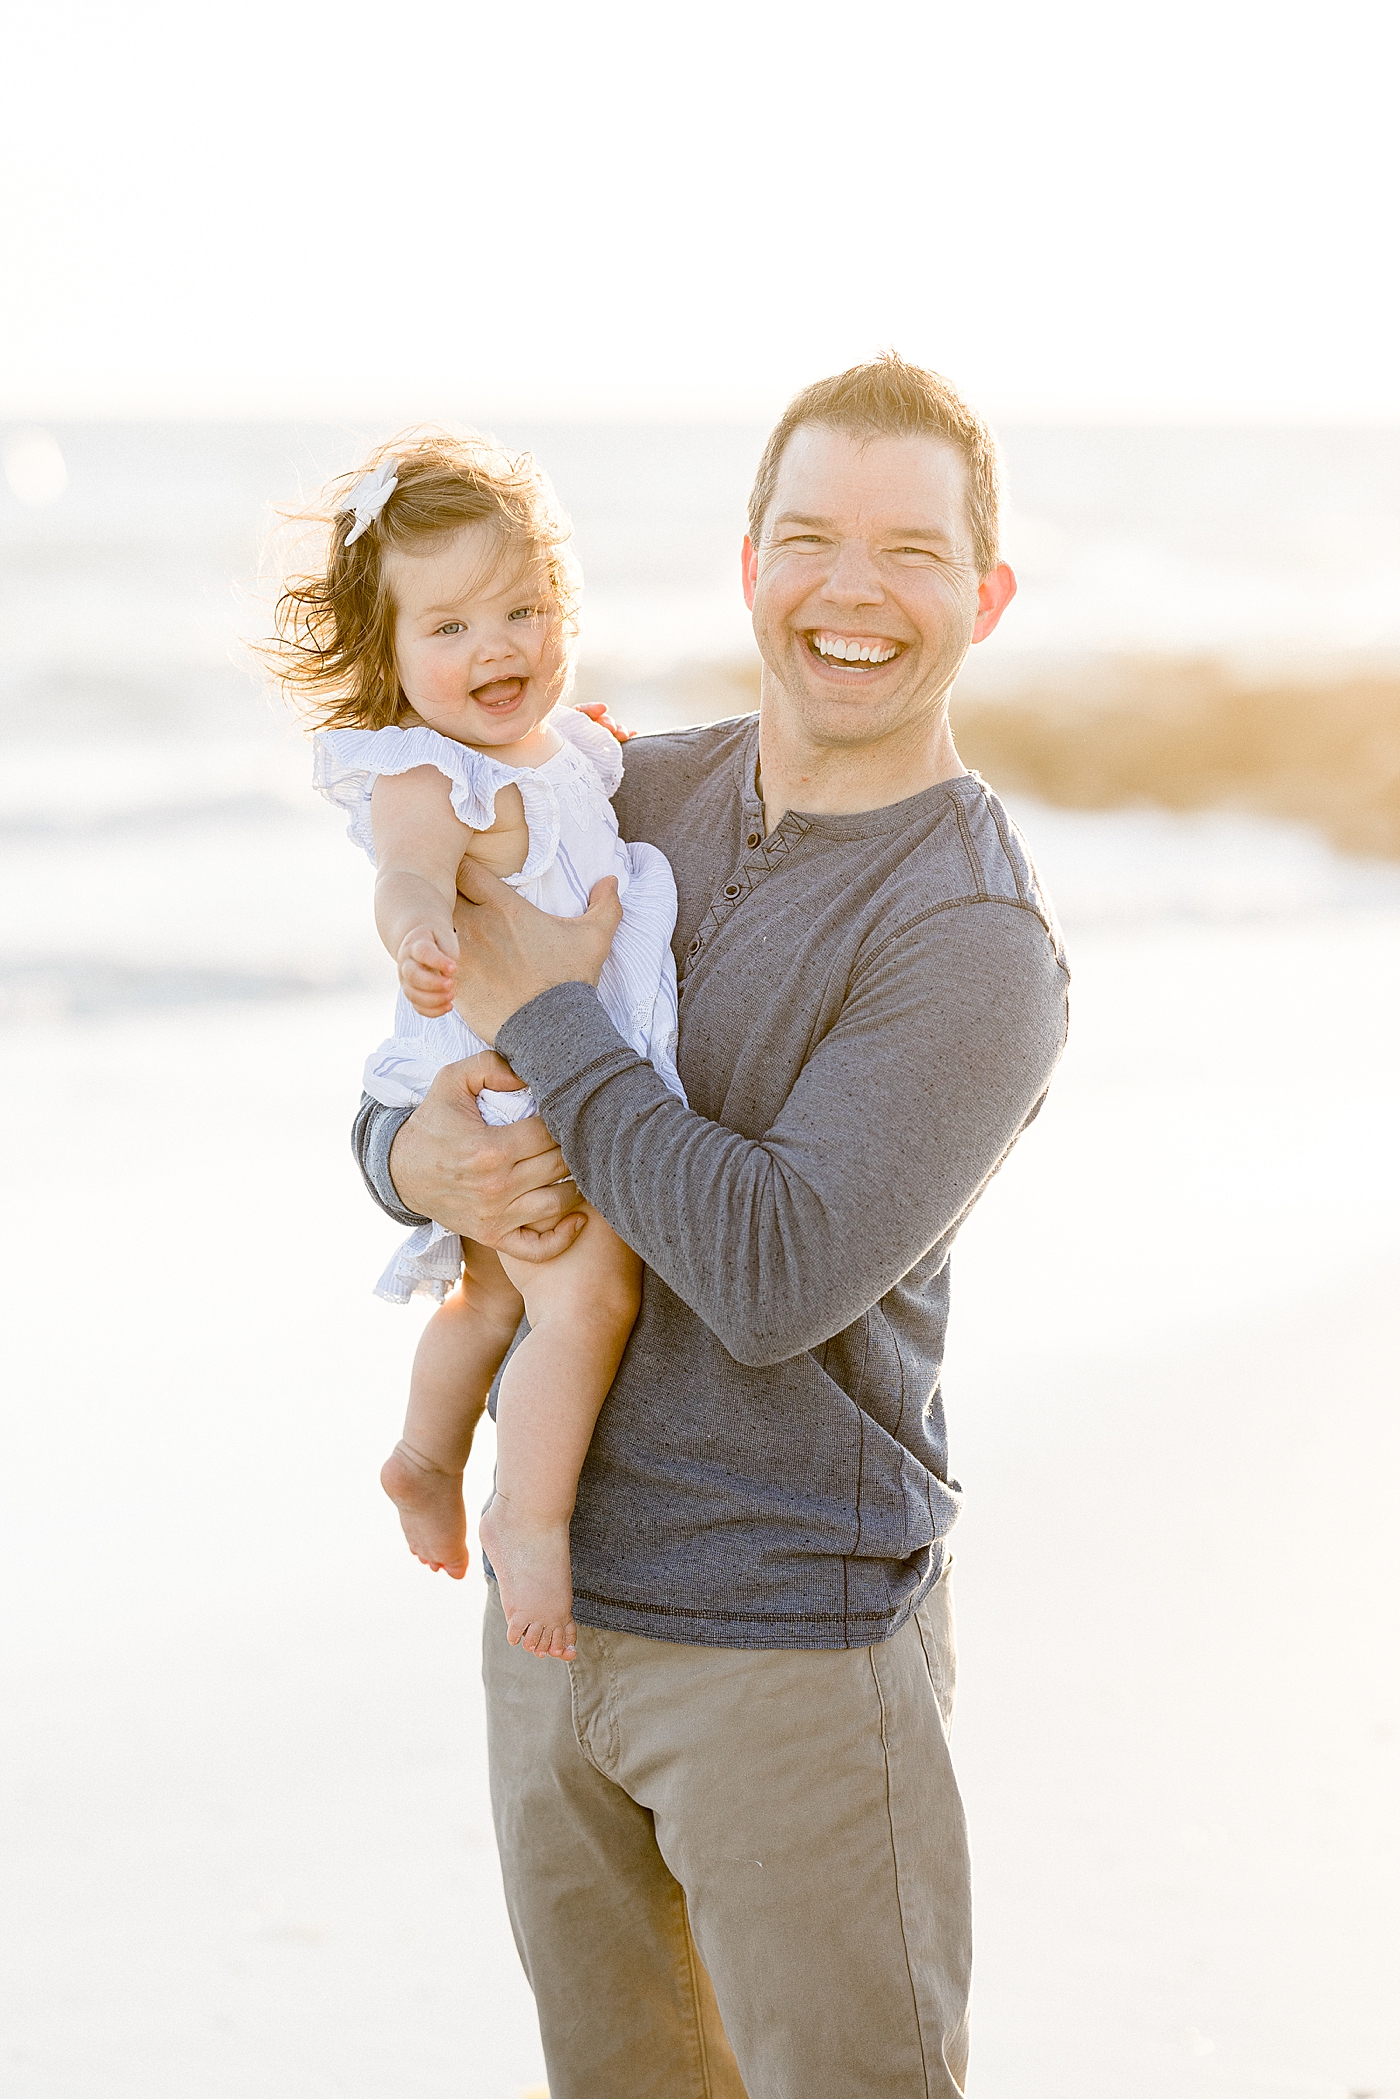 Dad holding his daughter at sunset on the beach. Photo by Brittany Elise Photography.